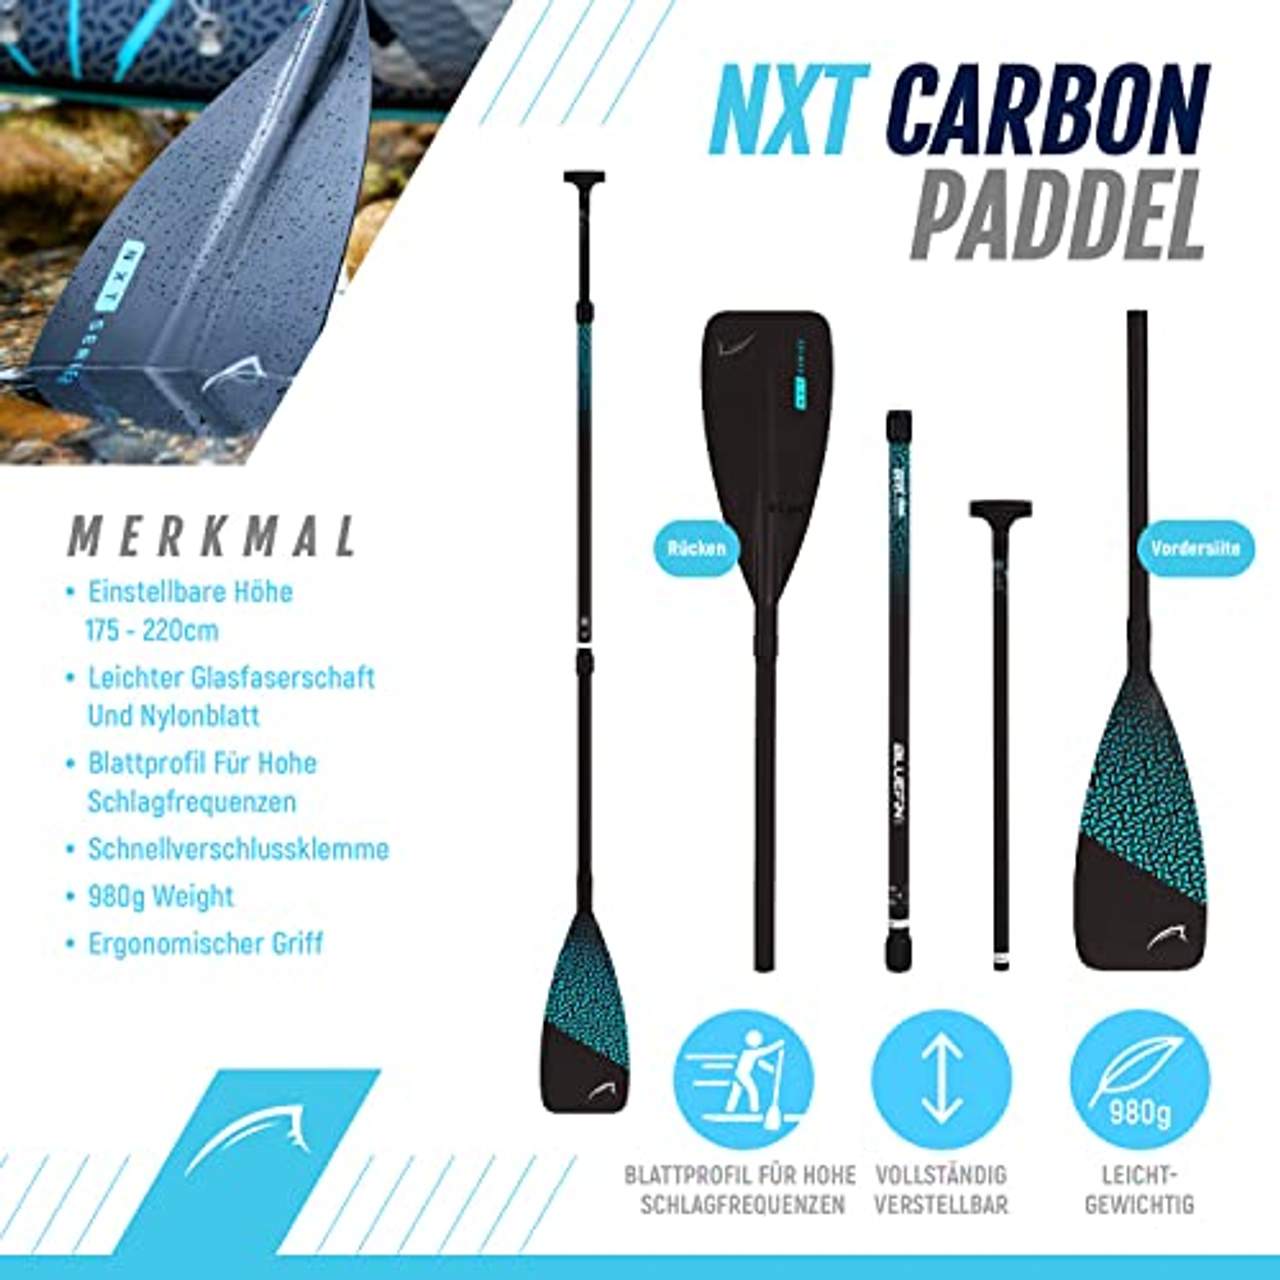 Bluefin SUP Nitro 14' aufpumpbares Stand-up-Paddleboard